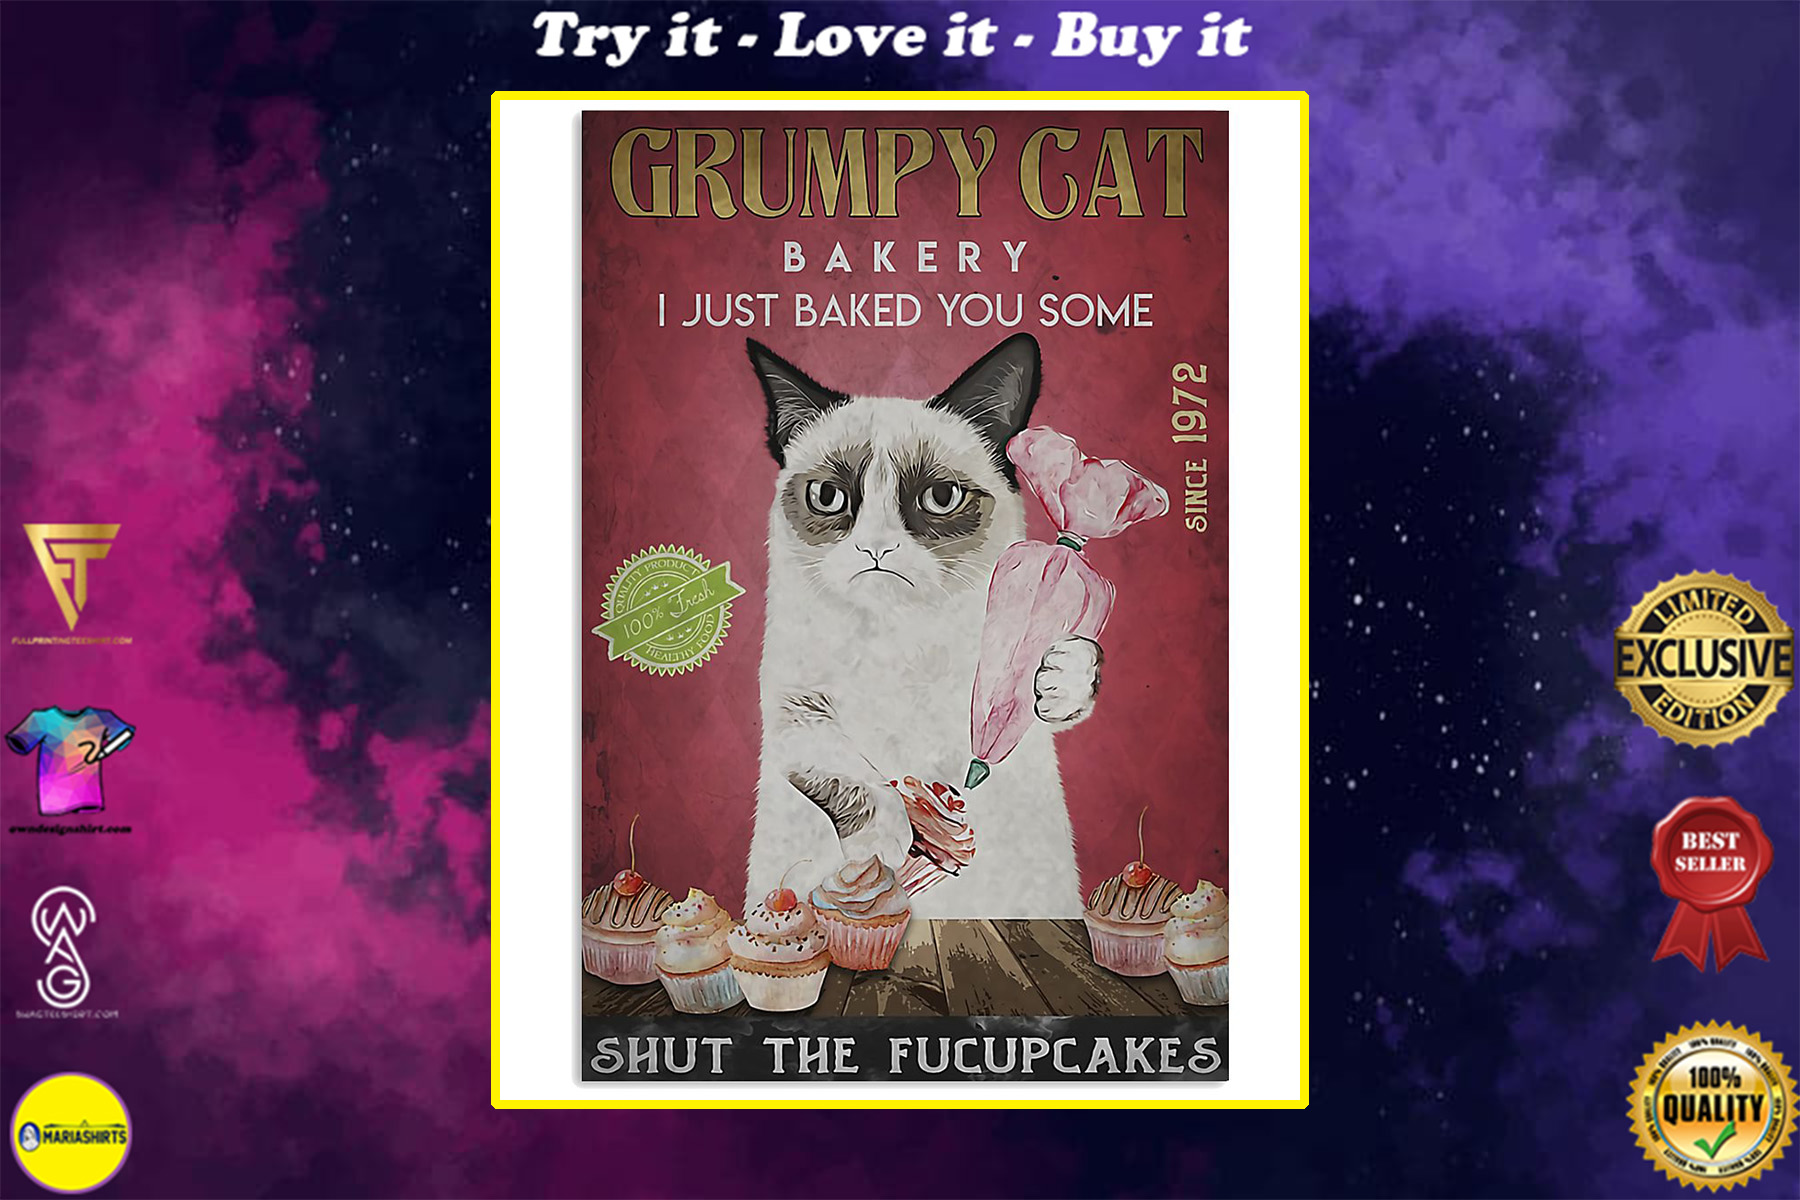 grumpy cat bakery i just baked you some shut the fucupcakes vintage poster